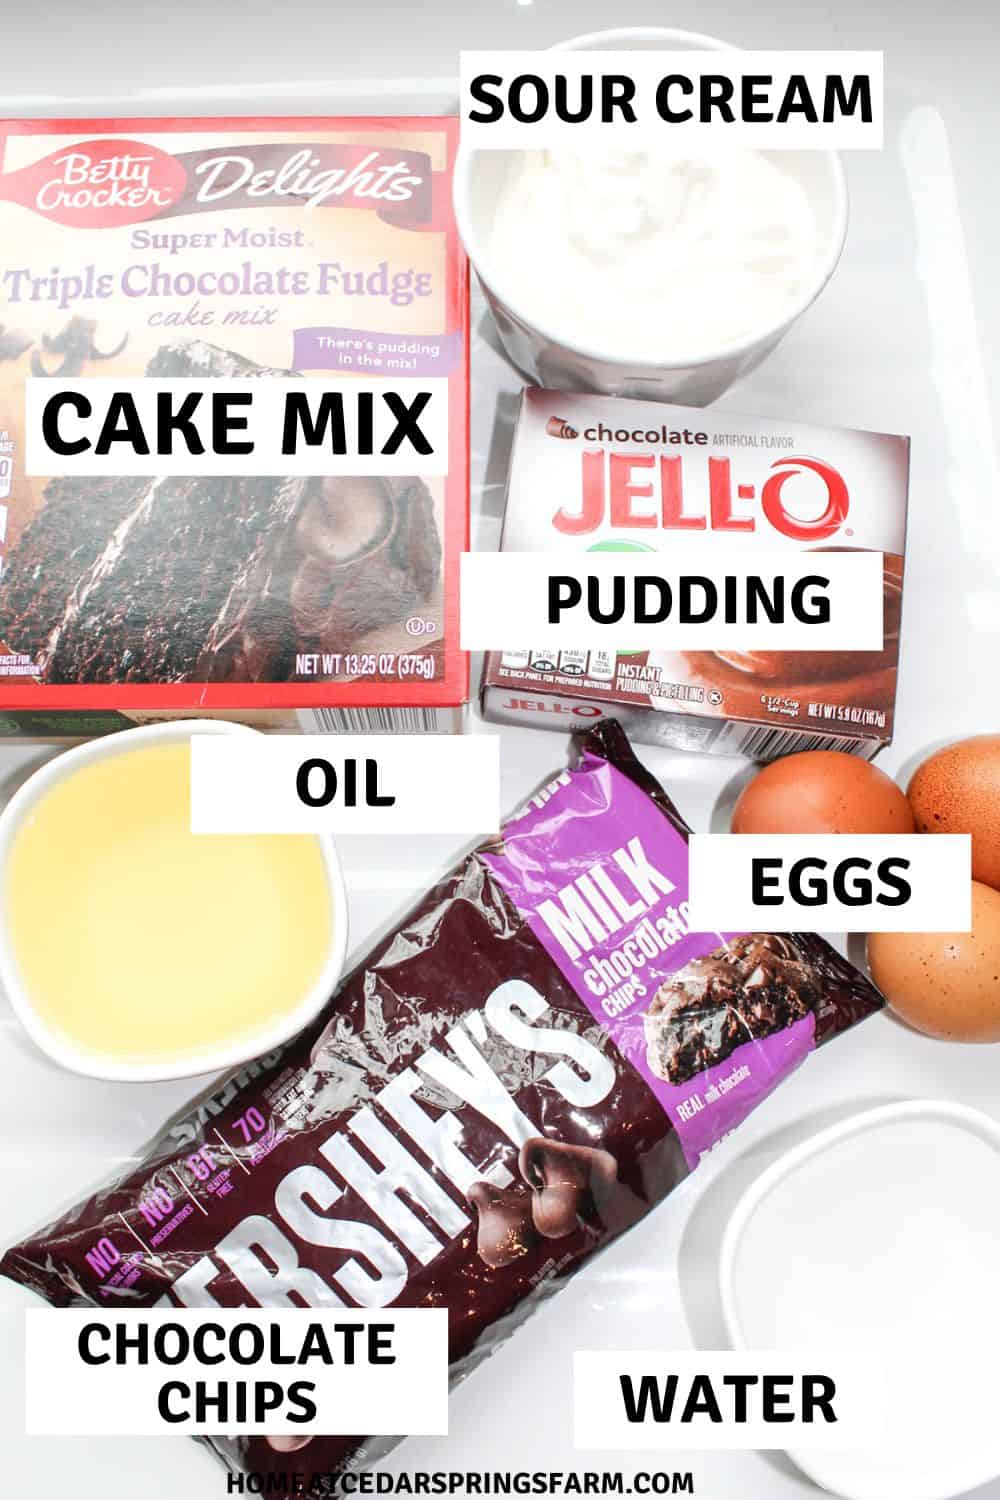 Ingredients shown for making Chocolate Bundt Cake with text overlay.